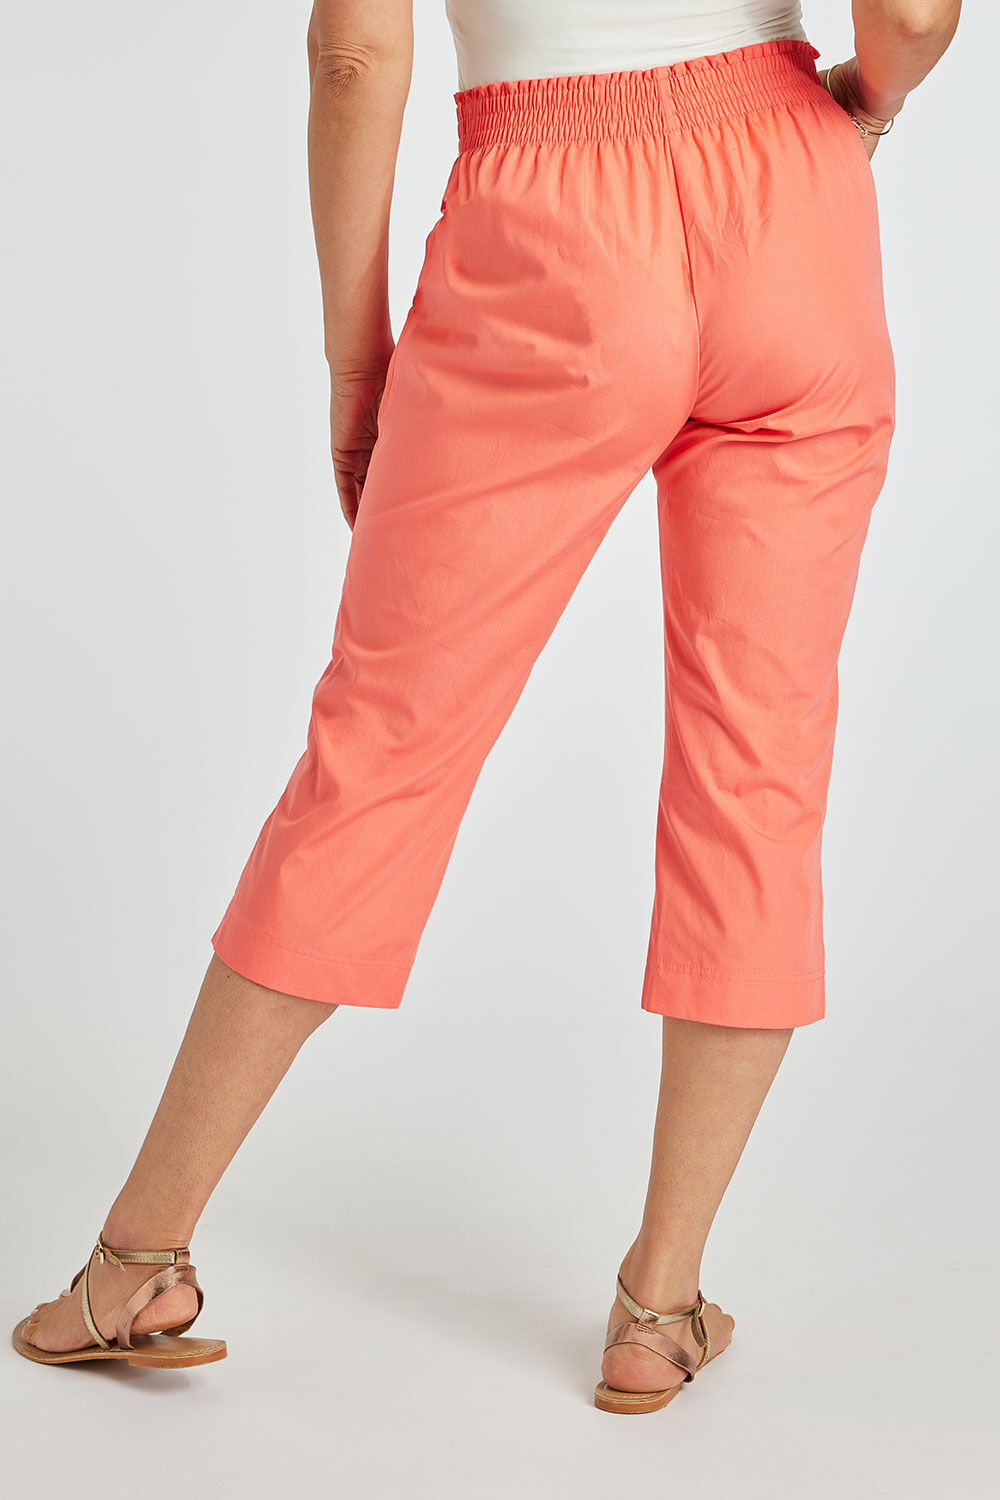 Ashley Magic Cropped Plain Capri Trousers 6 Colours  Missy Online  Shoes Fashion  Accessories Based in Leeds